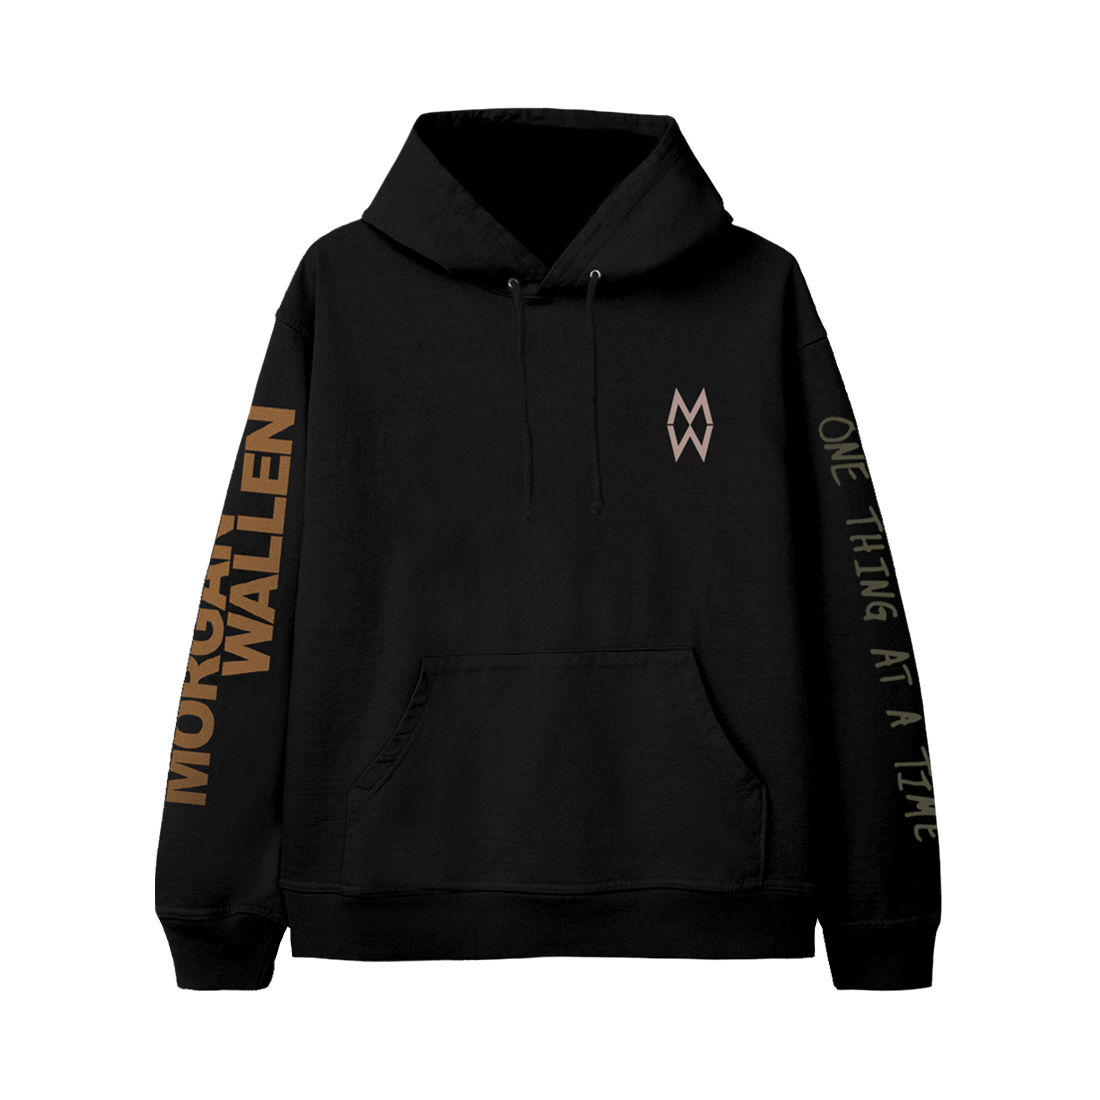 Morgan Wallen - One Thing At A Time Black Photo Hoodie